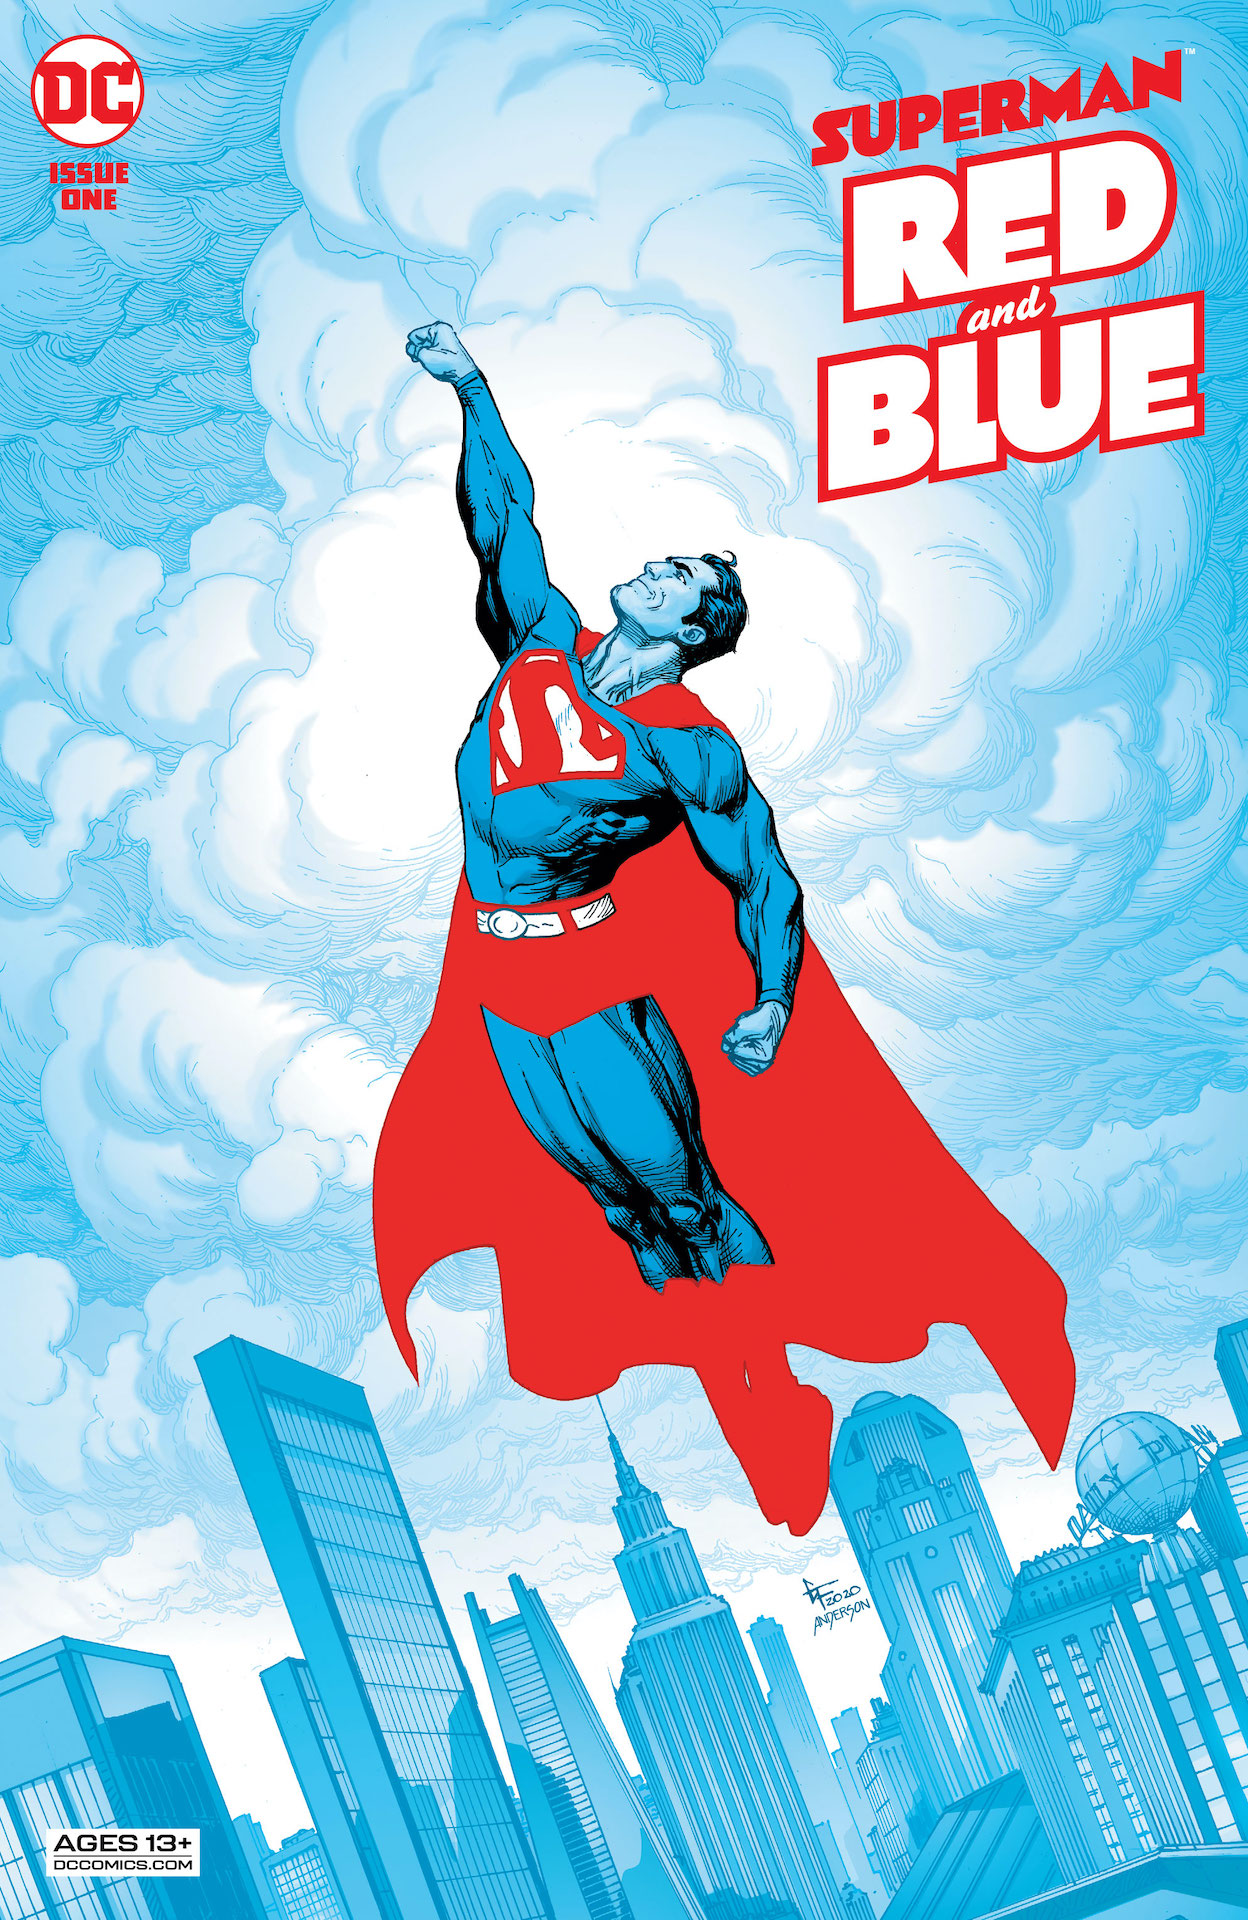 Superman: Red and Blue #1 preview